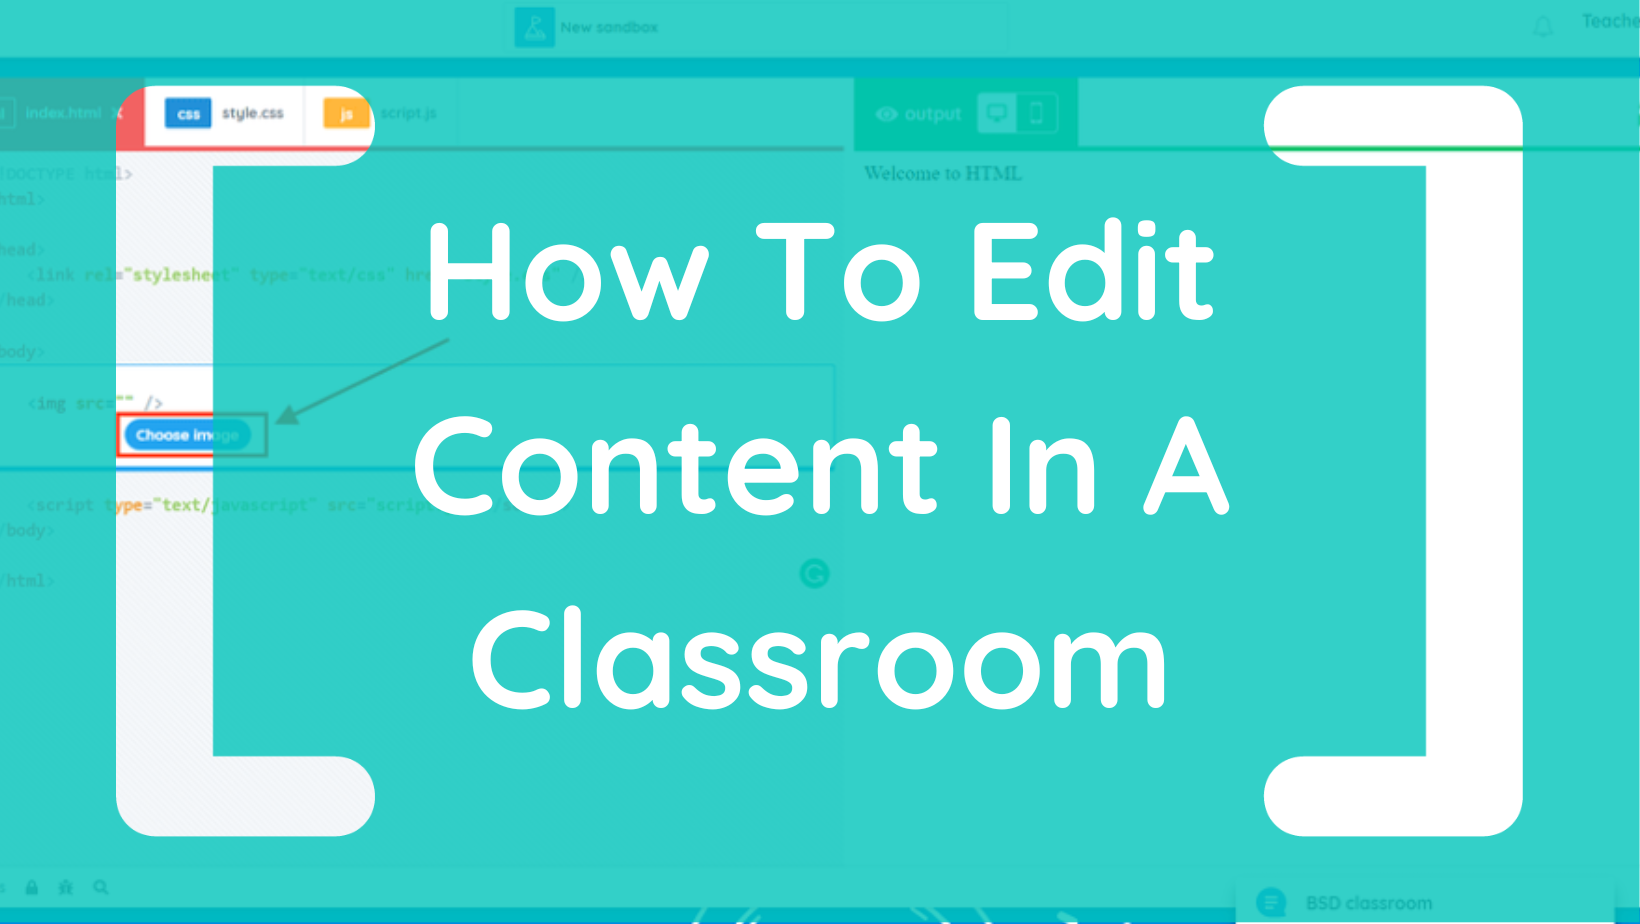 How to edit content in a classroom